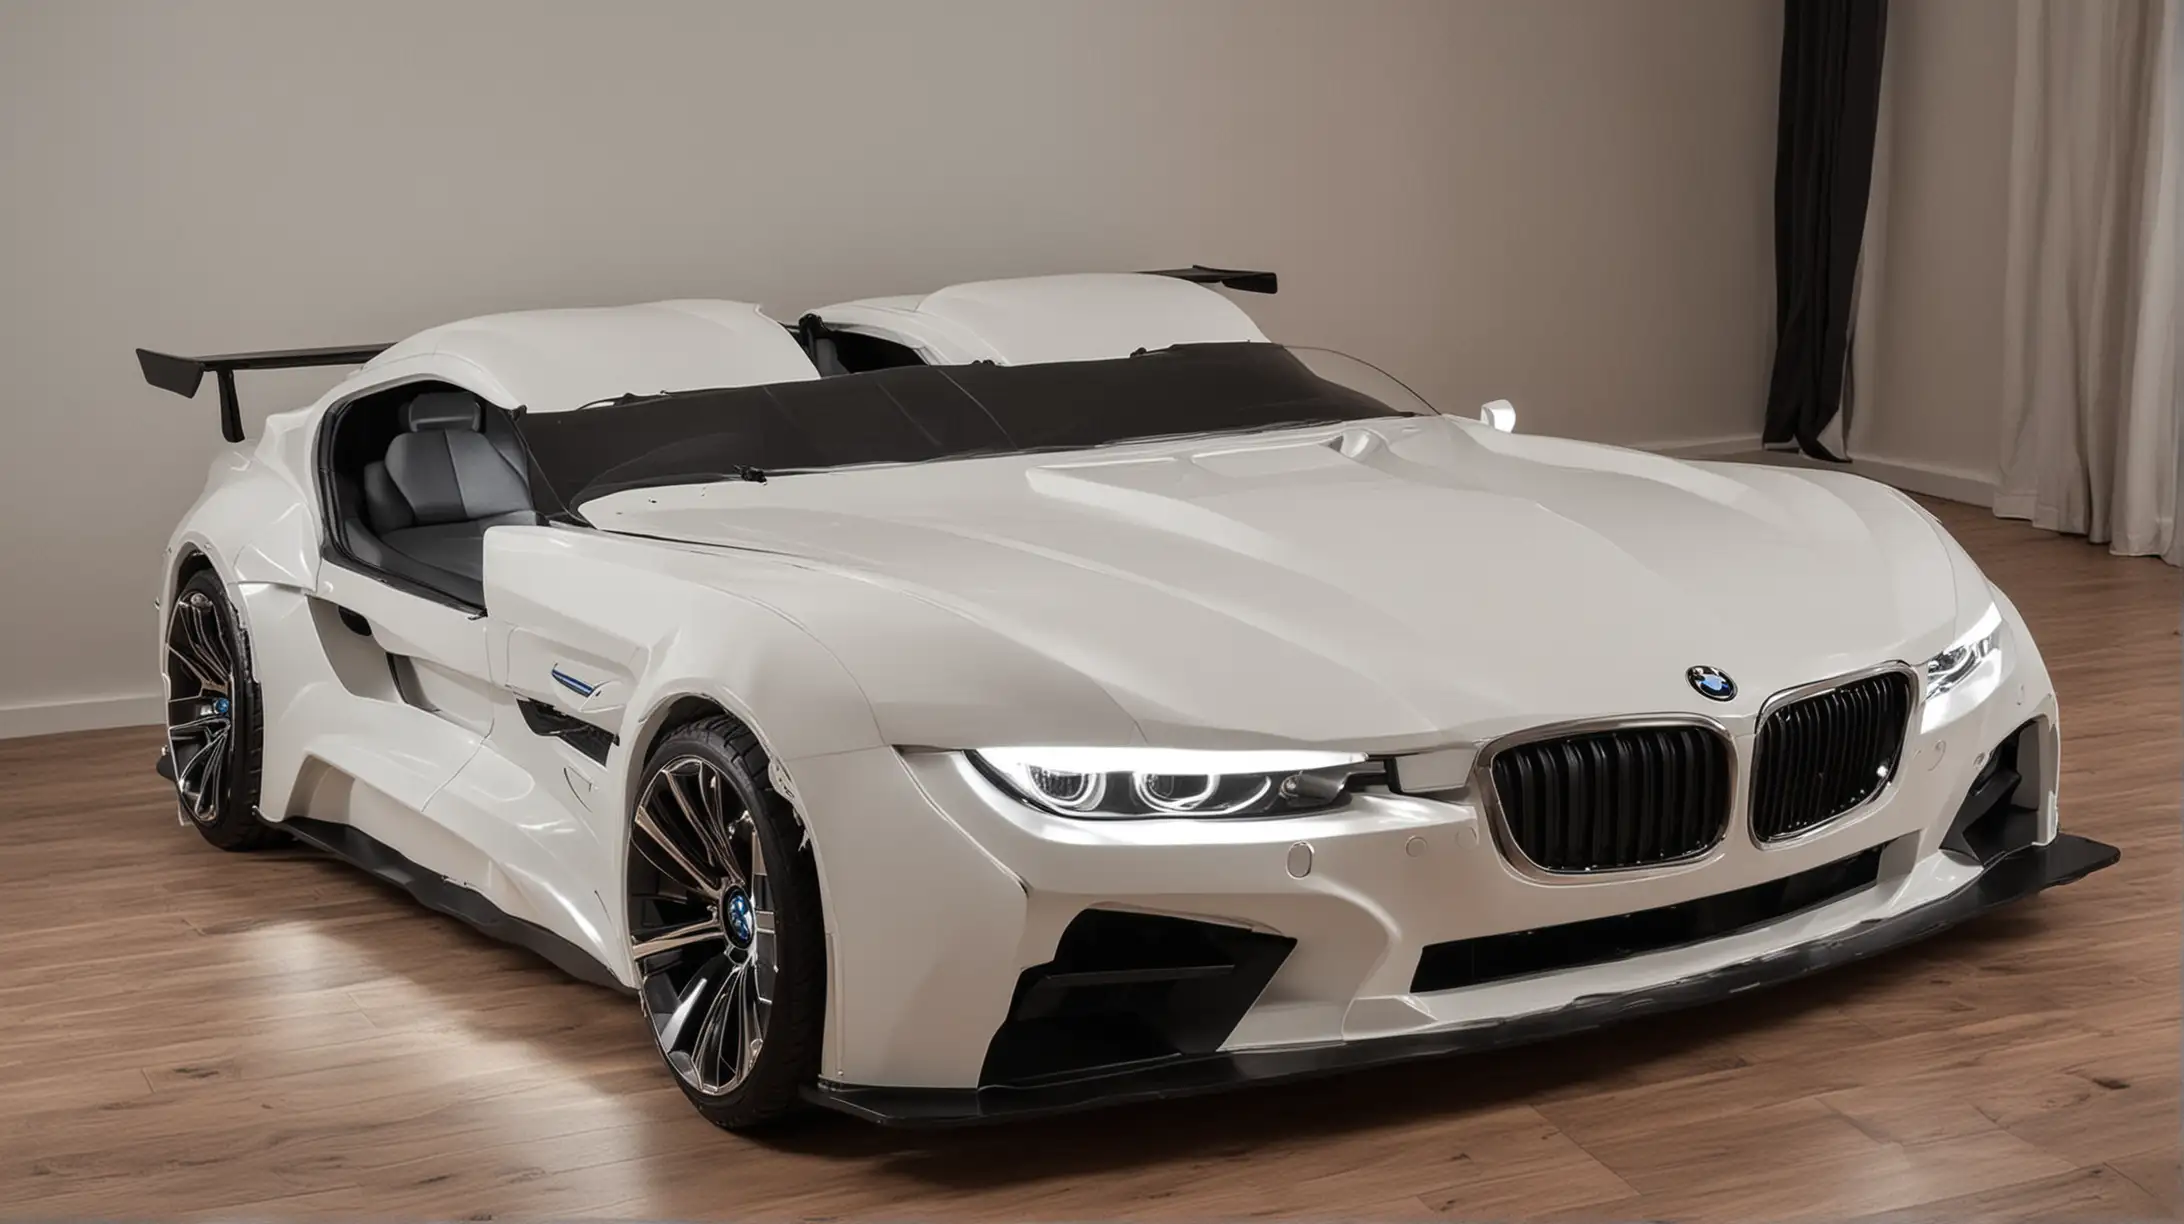 Luxurious Double Bed Shaped Like a BMW Car with Headlights On